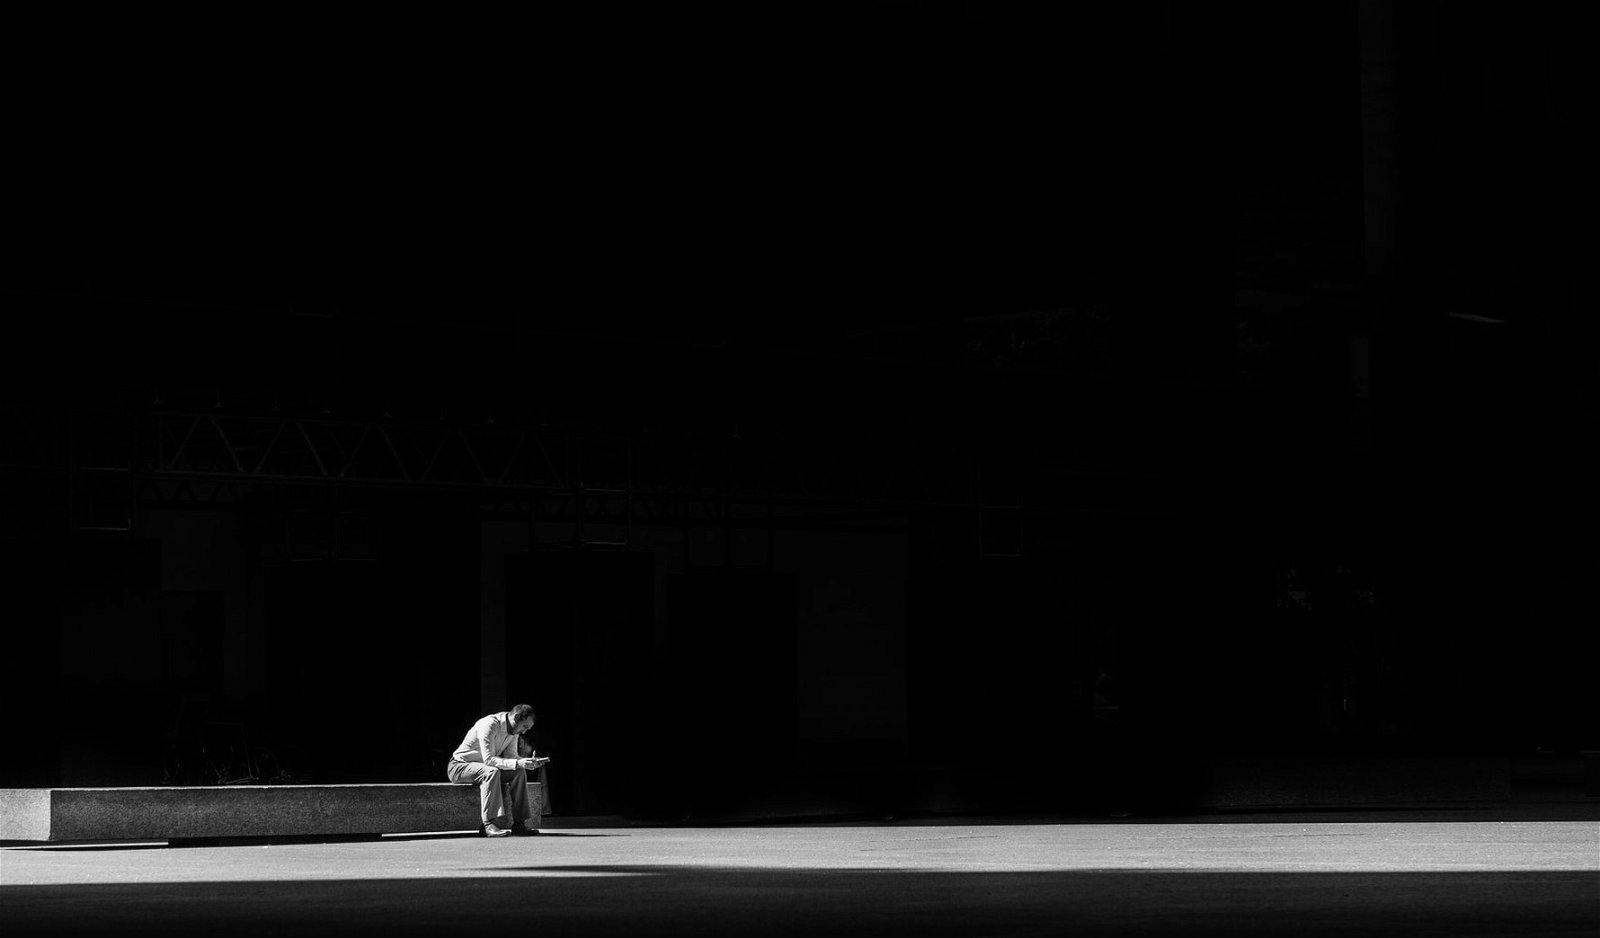 minimalistic black and white image of man sitting on a bench in a dark space.